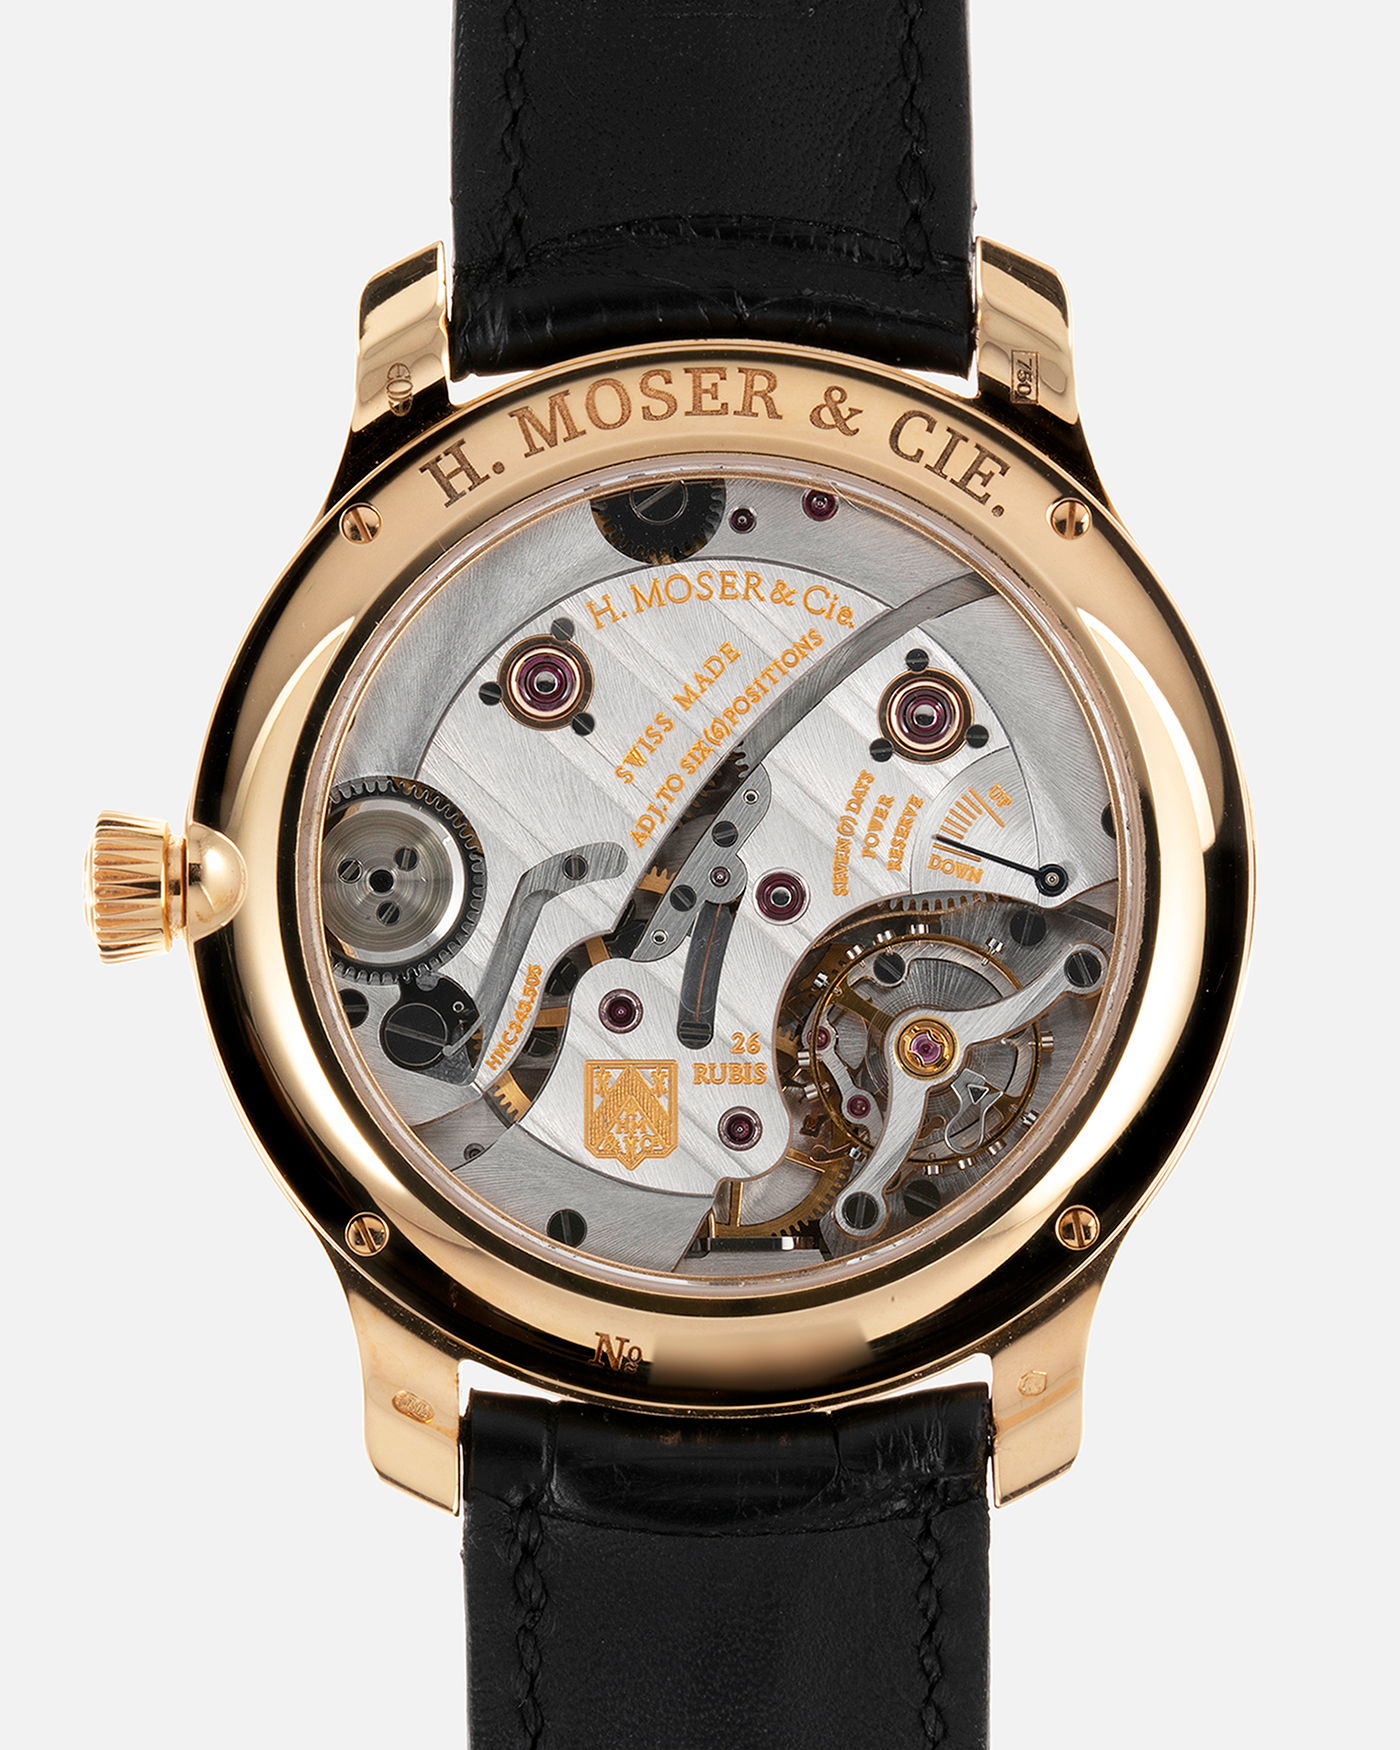 Brand: H. Moser & Cie Year: 2010's Model: Endeavour Monard Central Seconds Reference Number: 343.505-017 Material: 18k Rose Gold Movement: Manually wound Caliber HMC 343.505 Case Diameter: 40.8mm Bracelet/Strap: H. Moser & Cie Black Alligator Leather Strap with matching 18-carat Rose Gold Signed Tang Buckle